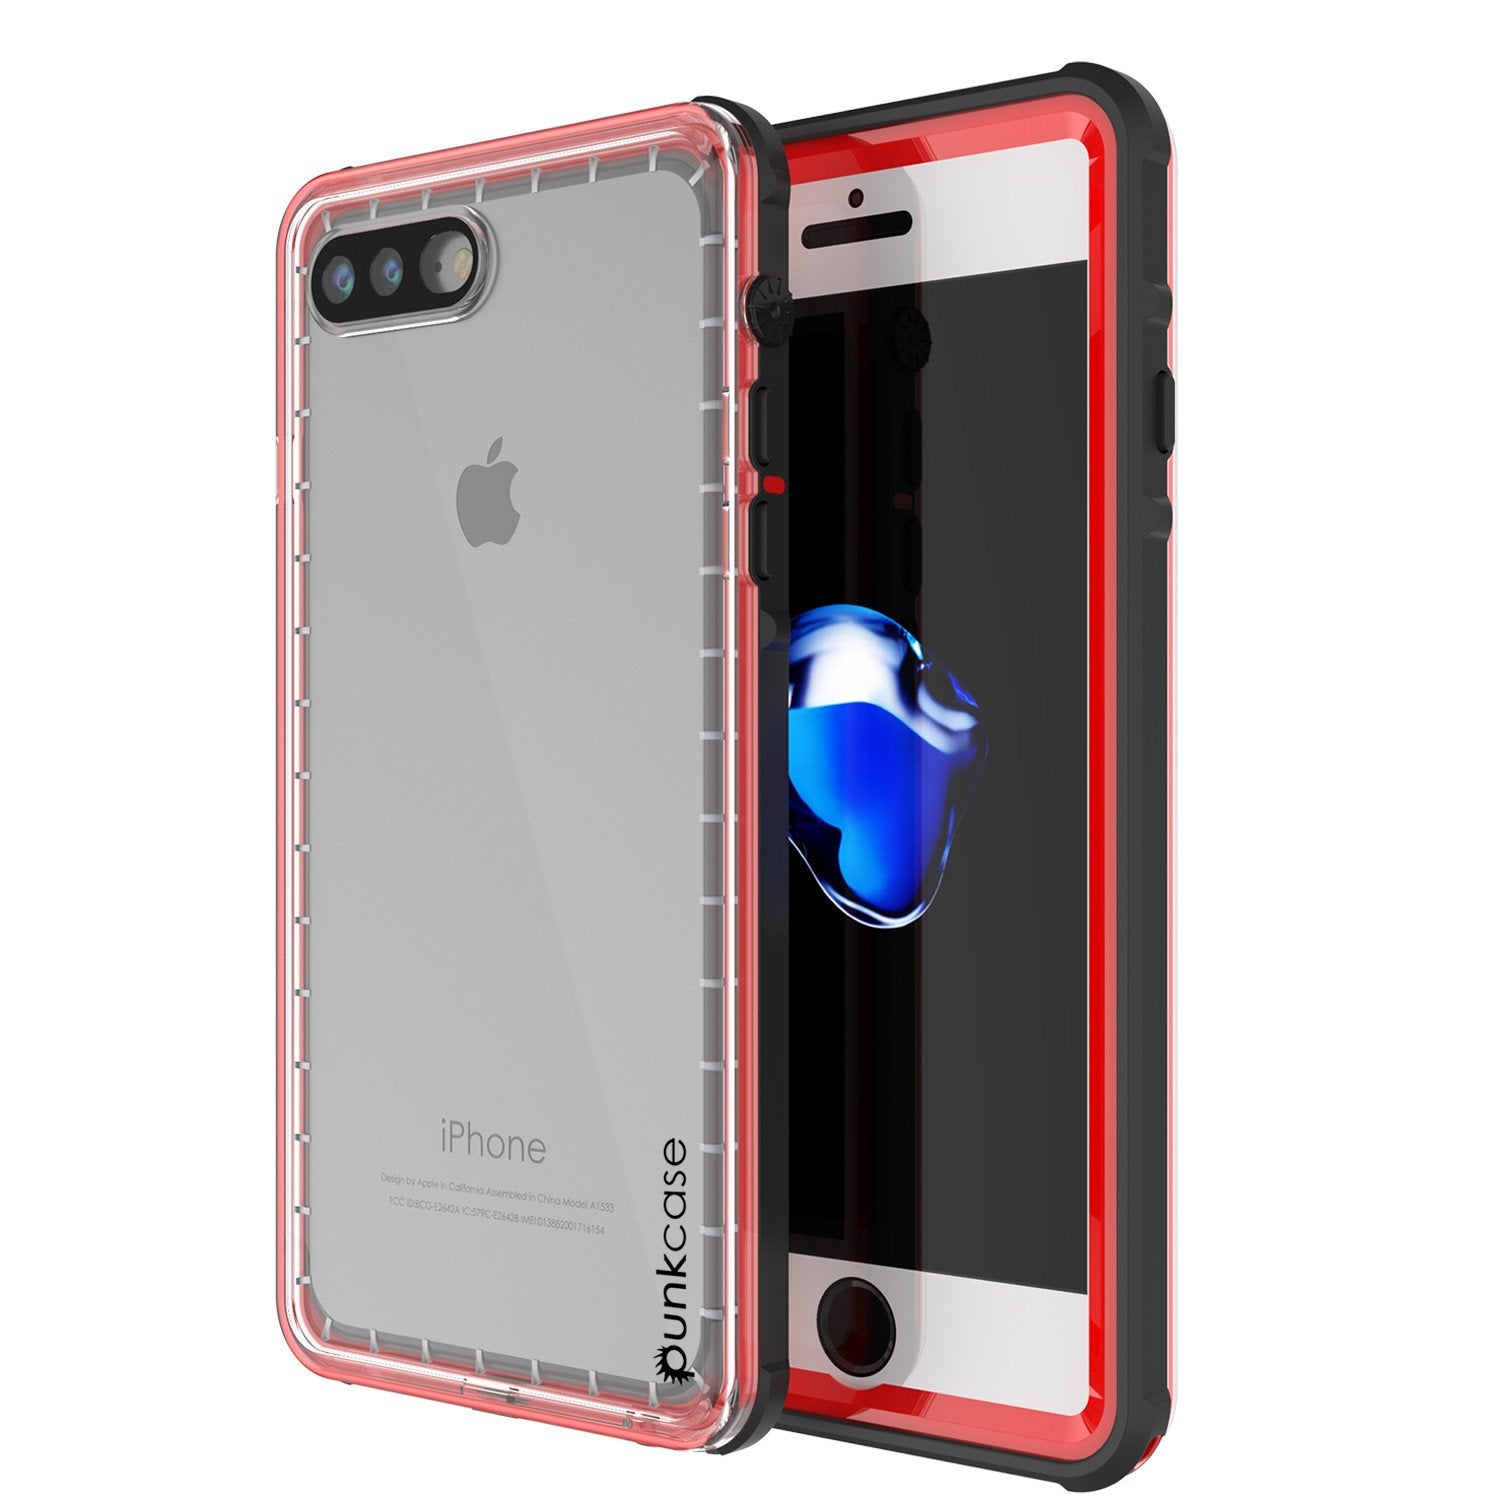 iPhone 7+ Plus Waterproof Case, PUNKcase CRYSTAL Red W/ Attached Screen Protector  | Warranty - PunkCase NZ